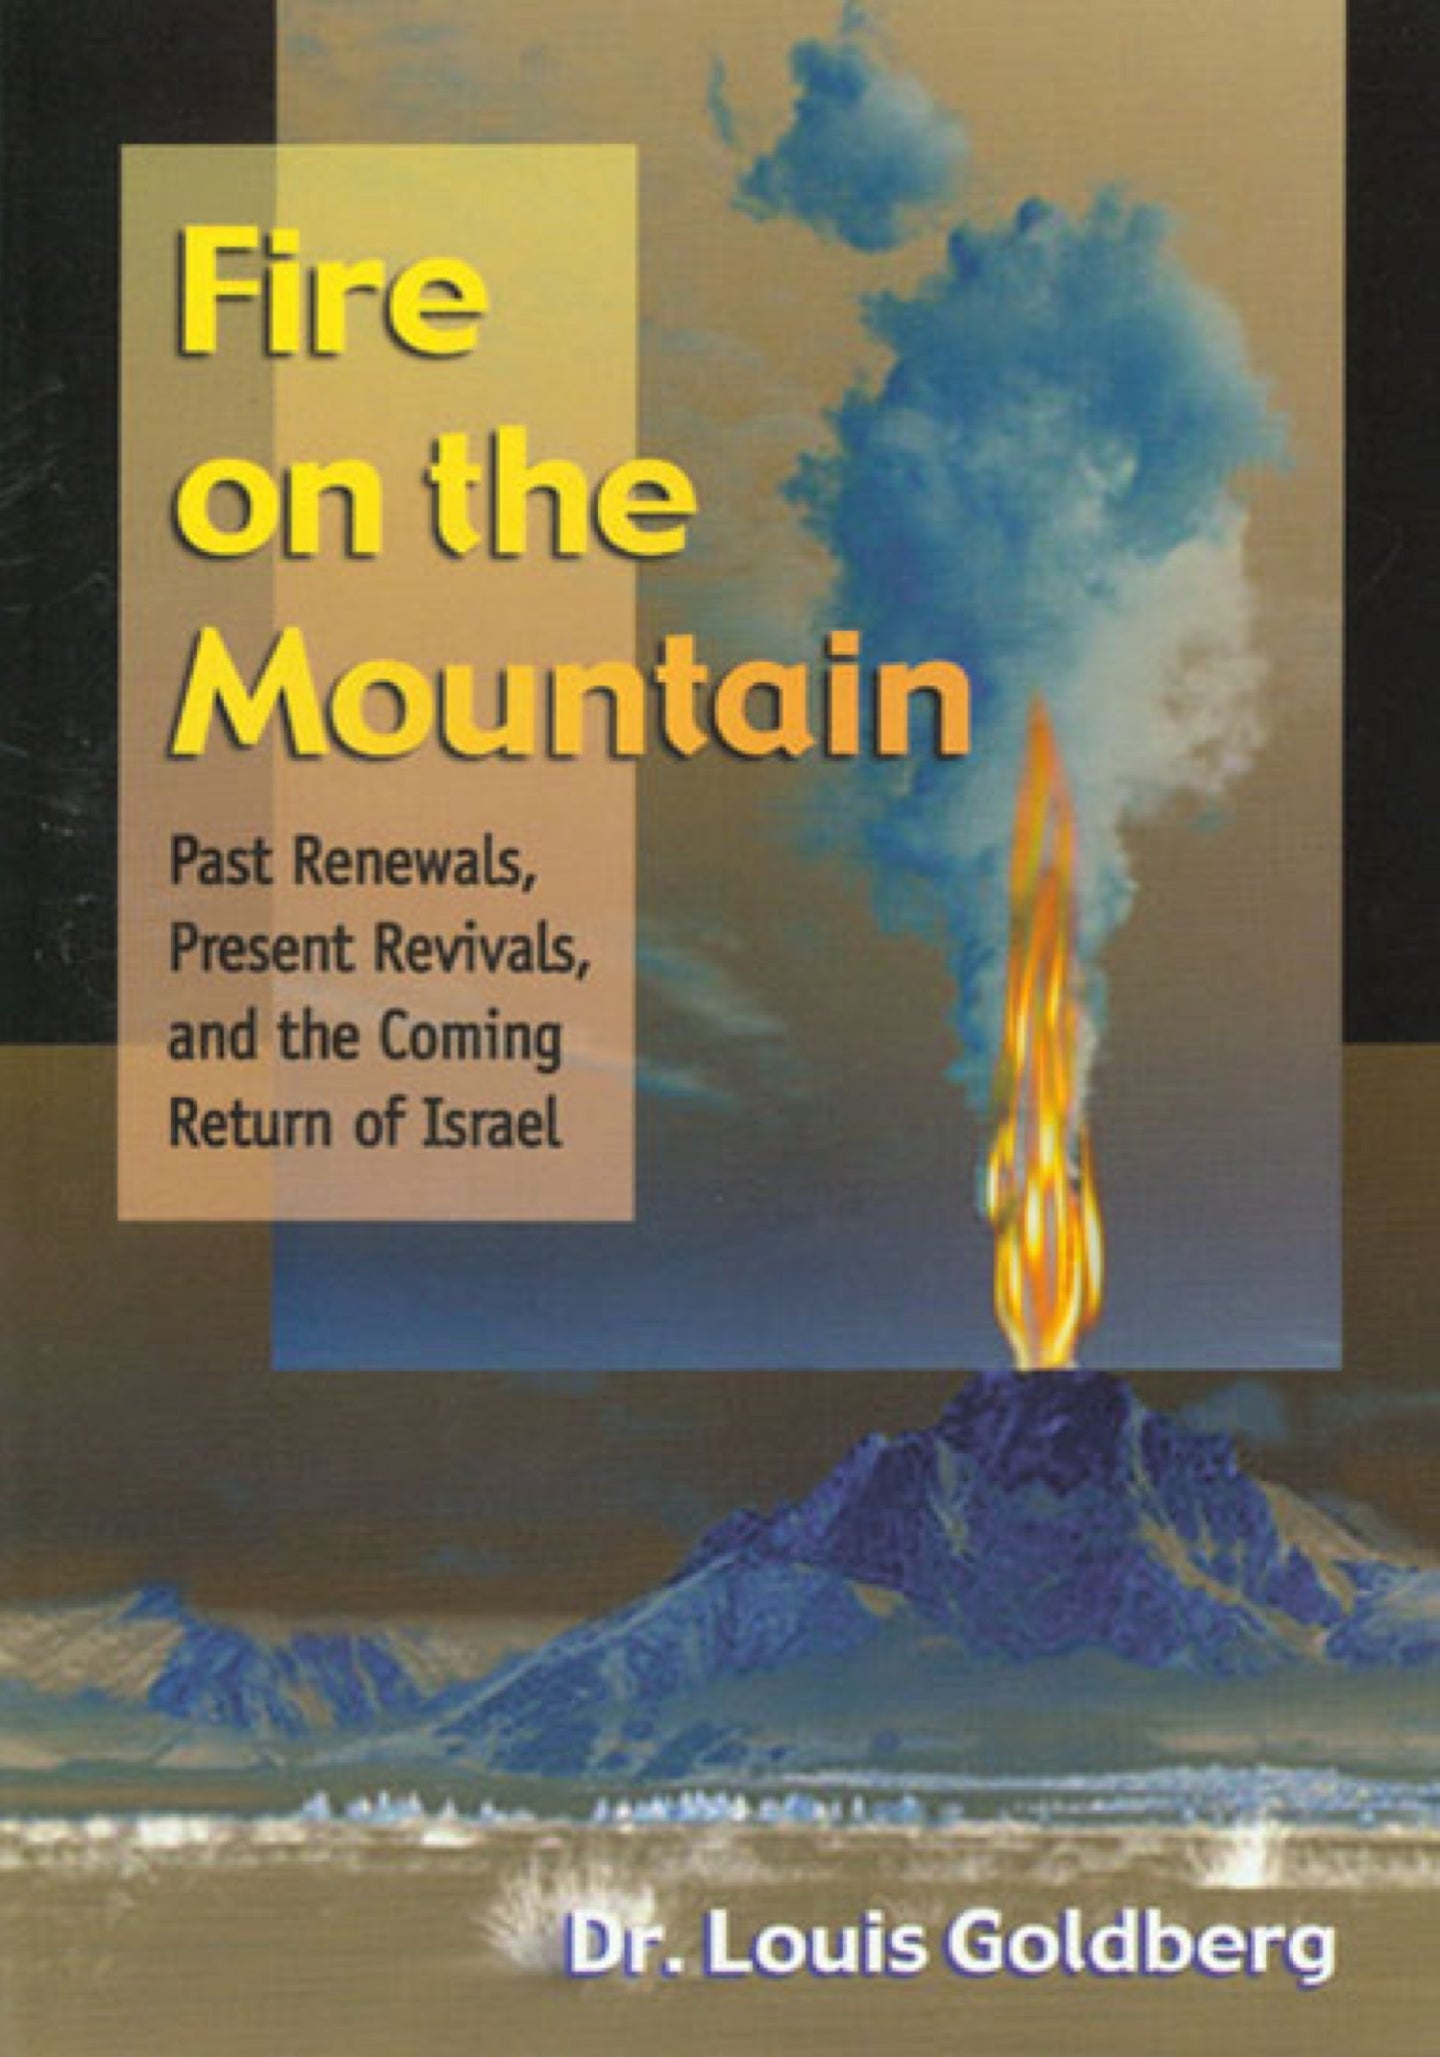 Fire on the Mountain: Past Renewals, Present Revivals, and the Coming Return of Israel by Dr. Louis Goldberg